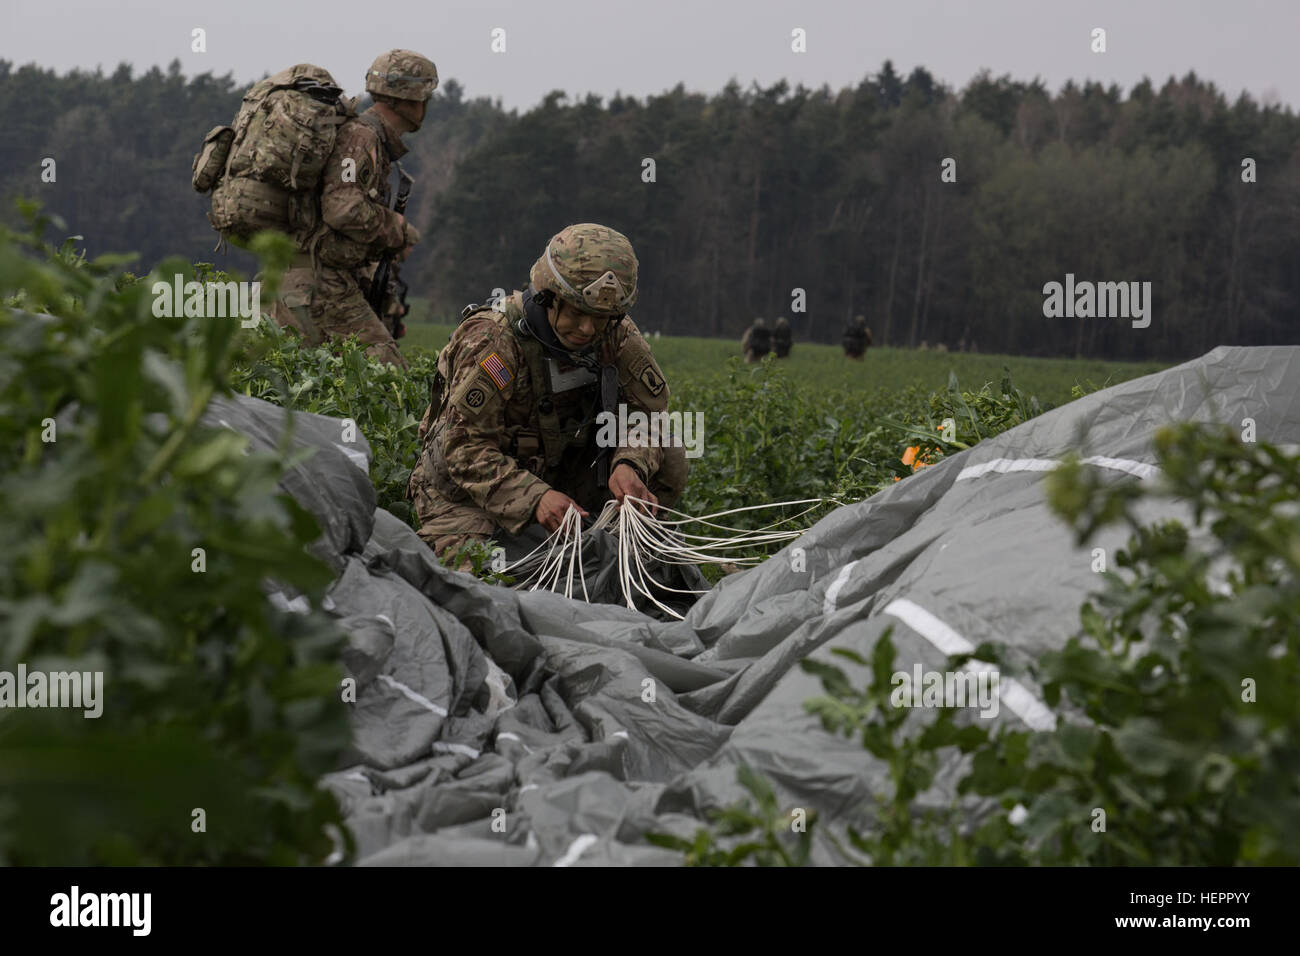 A U.S. Soldier of the 173rd Airborne Brigade jump gathers his parachute while conducting an airborne operation during exercise Saber Junction 16 at the German Maneuver Rights Area outside Hohenfels, Germany, April 12, 2016. Saber Junction 16 is the U.S. Army Europe’s 173rd Airborne Brigade’s combat training center certification exercise, taking place at the JMRC in Hohenfels, Germany, Mar. 31-Apr. 24, 2016.  The exercise is designed to evaluate the readiness of the Army’s Europe-based combat brigades to conduct unified land operations and promote interoperability in a joint, multinational envi Stock Photo